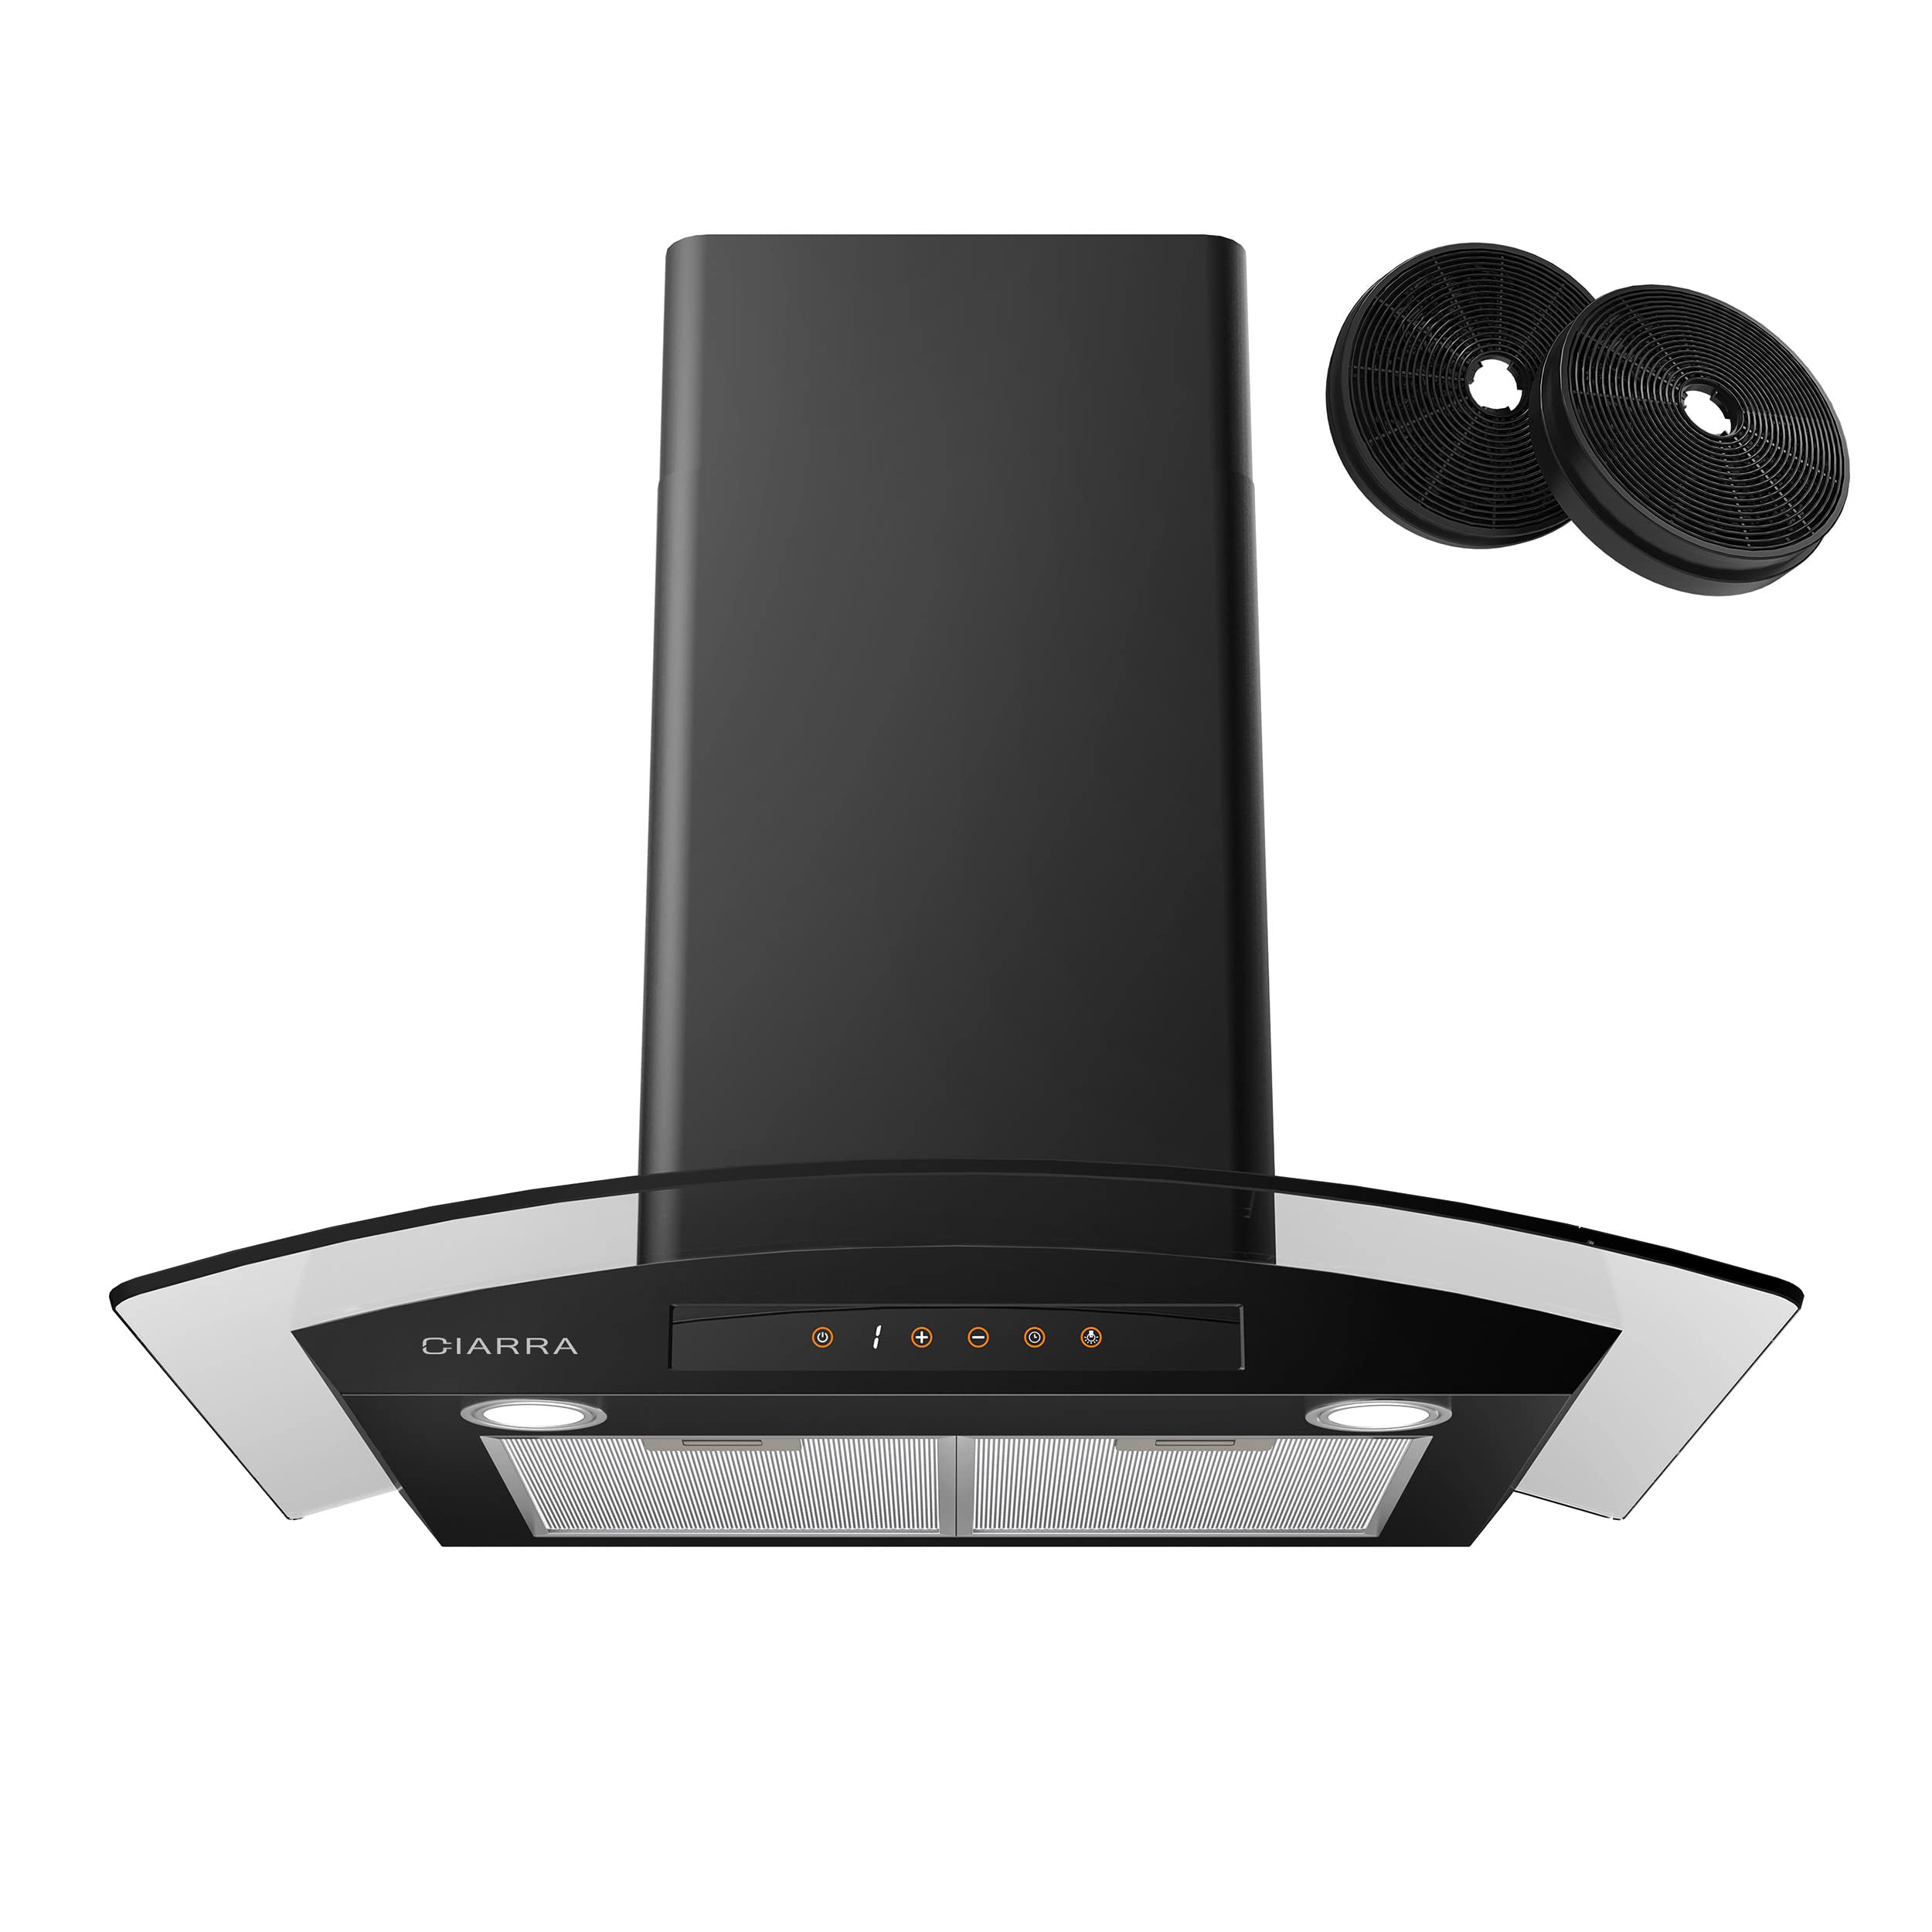 cIARRA Black Range Hood 30 inch with Soft Touch control 450 cFM Stove Vent Hood for Kitchen with 3 Speed Exhaust Fan Auto Shut O